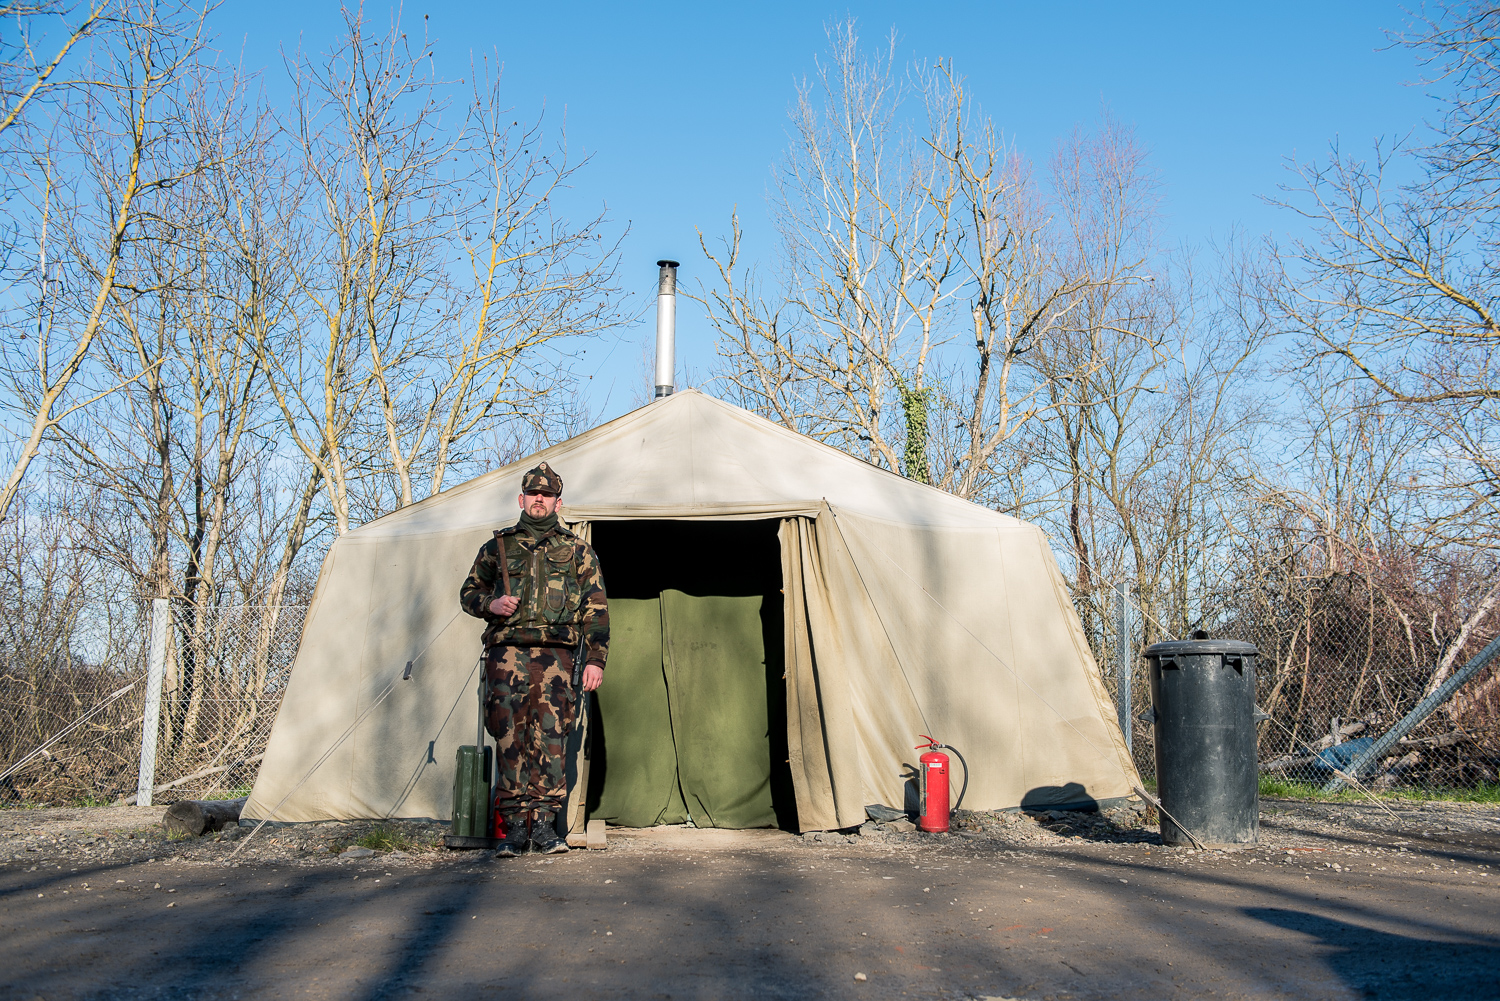  Soldier stands in front of a military warming tent to secure the border between Hungary and Serbia near Hercegszántó Hungary 24 December 2017. The Hungarian border fence was constructed in the middle of the European migration crisis in 2015, with th